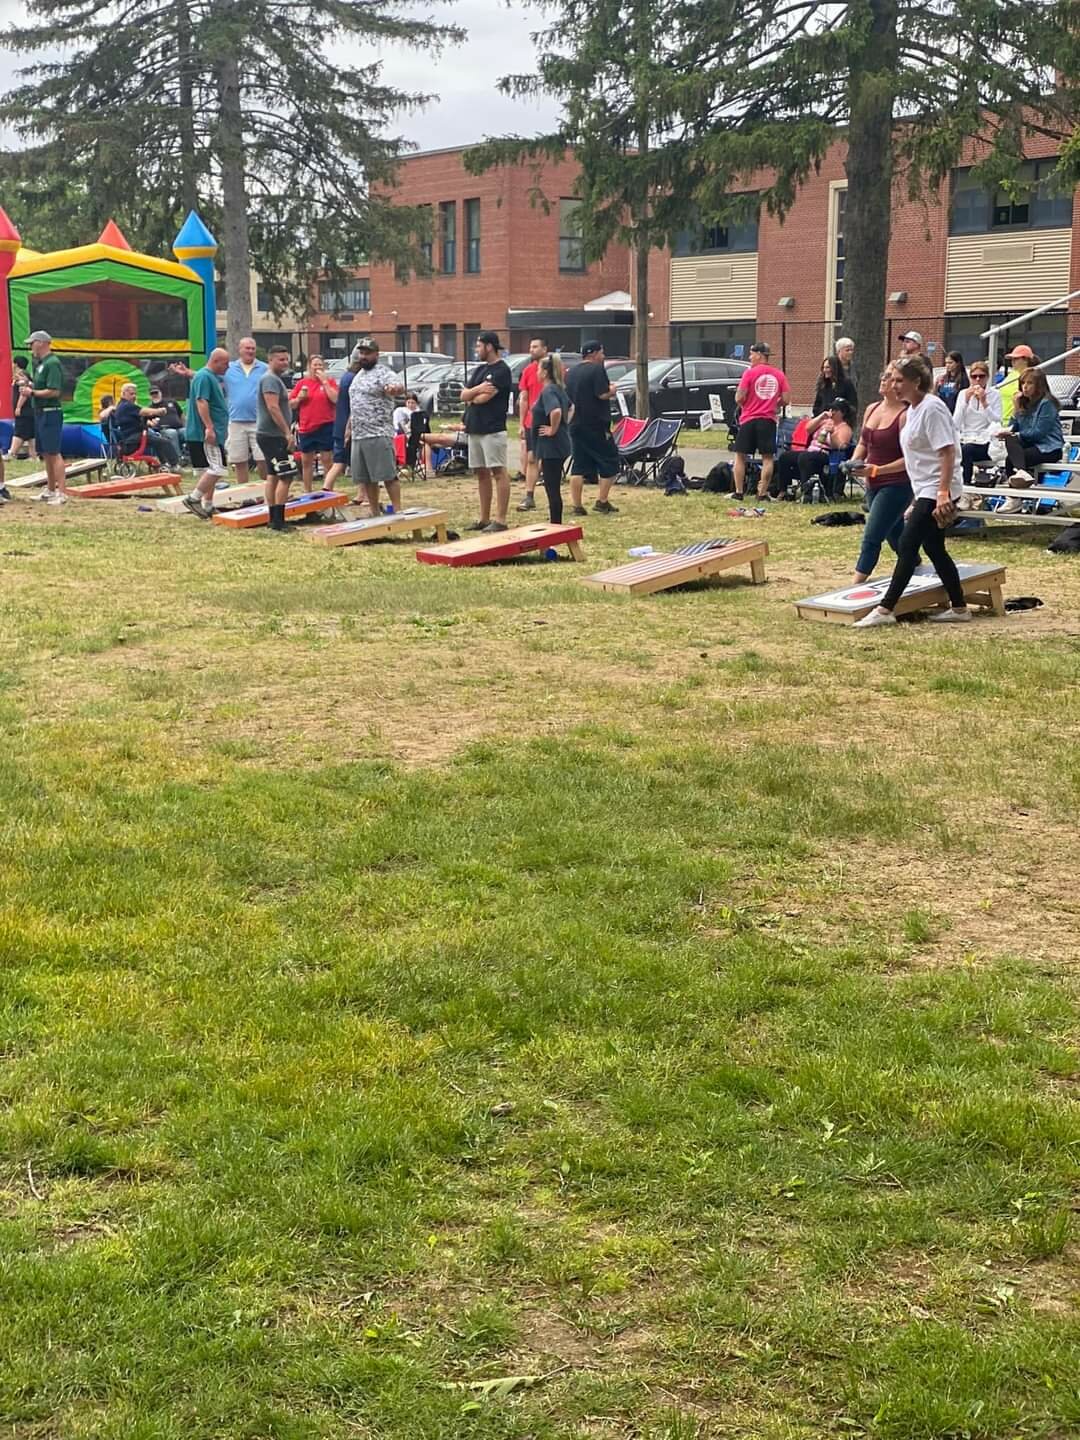 The Independent Order of Odd Fellows Lodge No. 279 in Rockville Centre hosted their annual charity Corn Hole Tournament on Saturday, June 3 at Fireman’s Field.